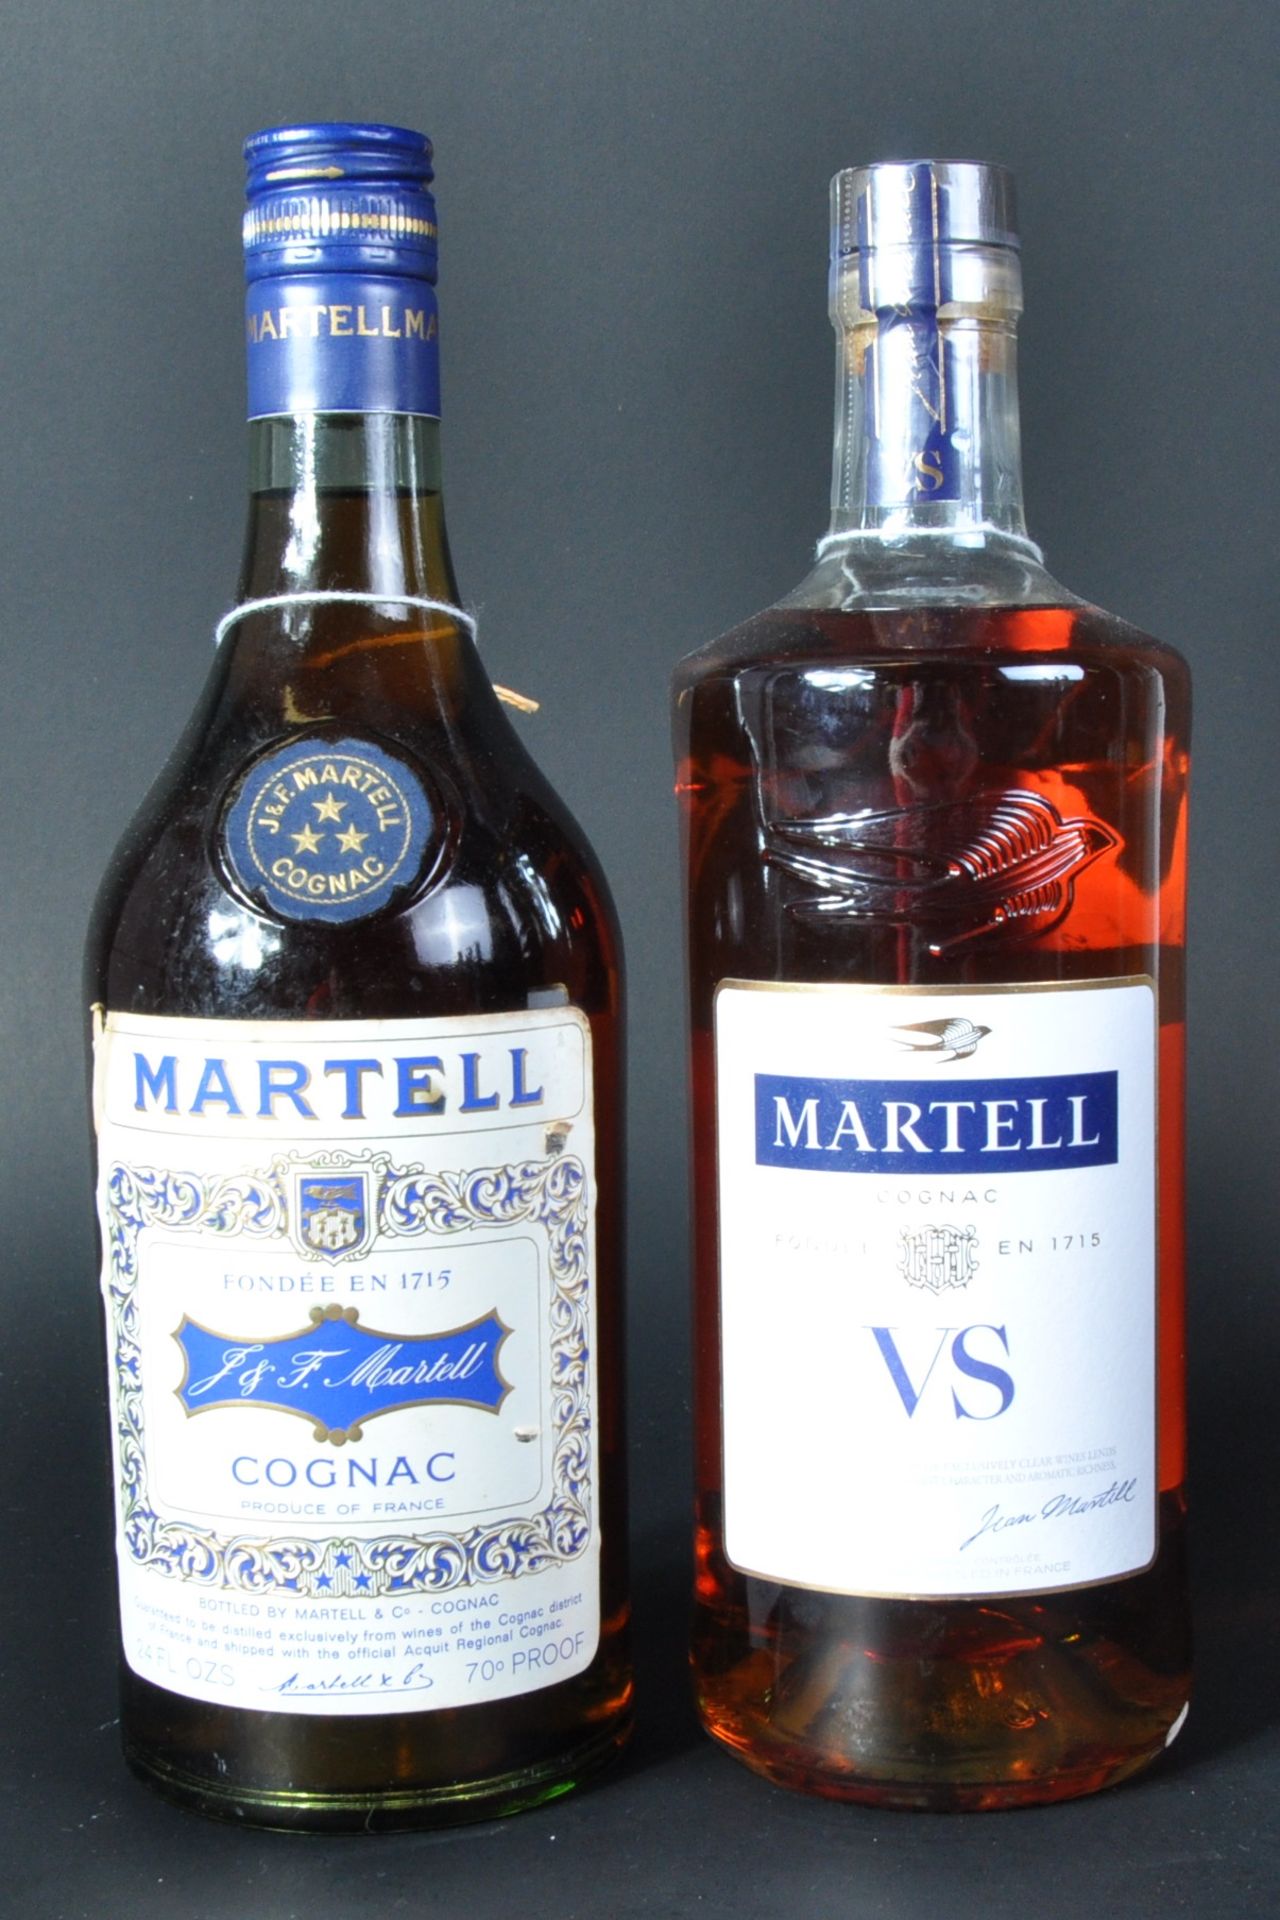 TWO BOTTLES OF MARTELL FRENCH COGNAC